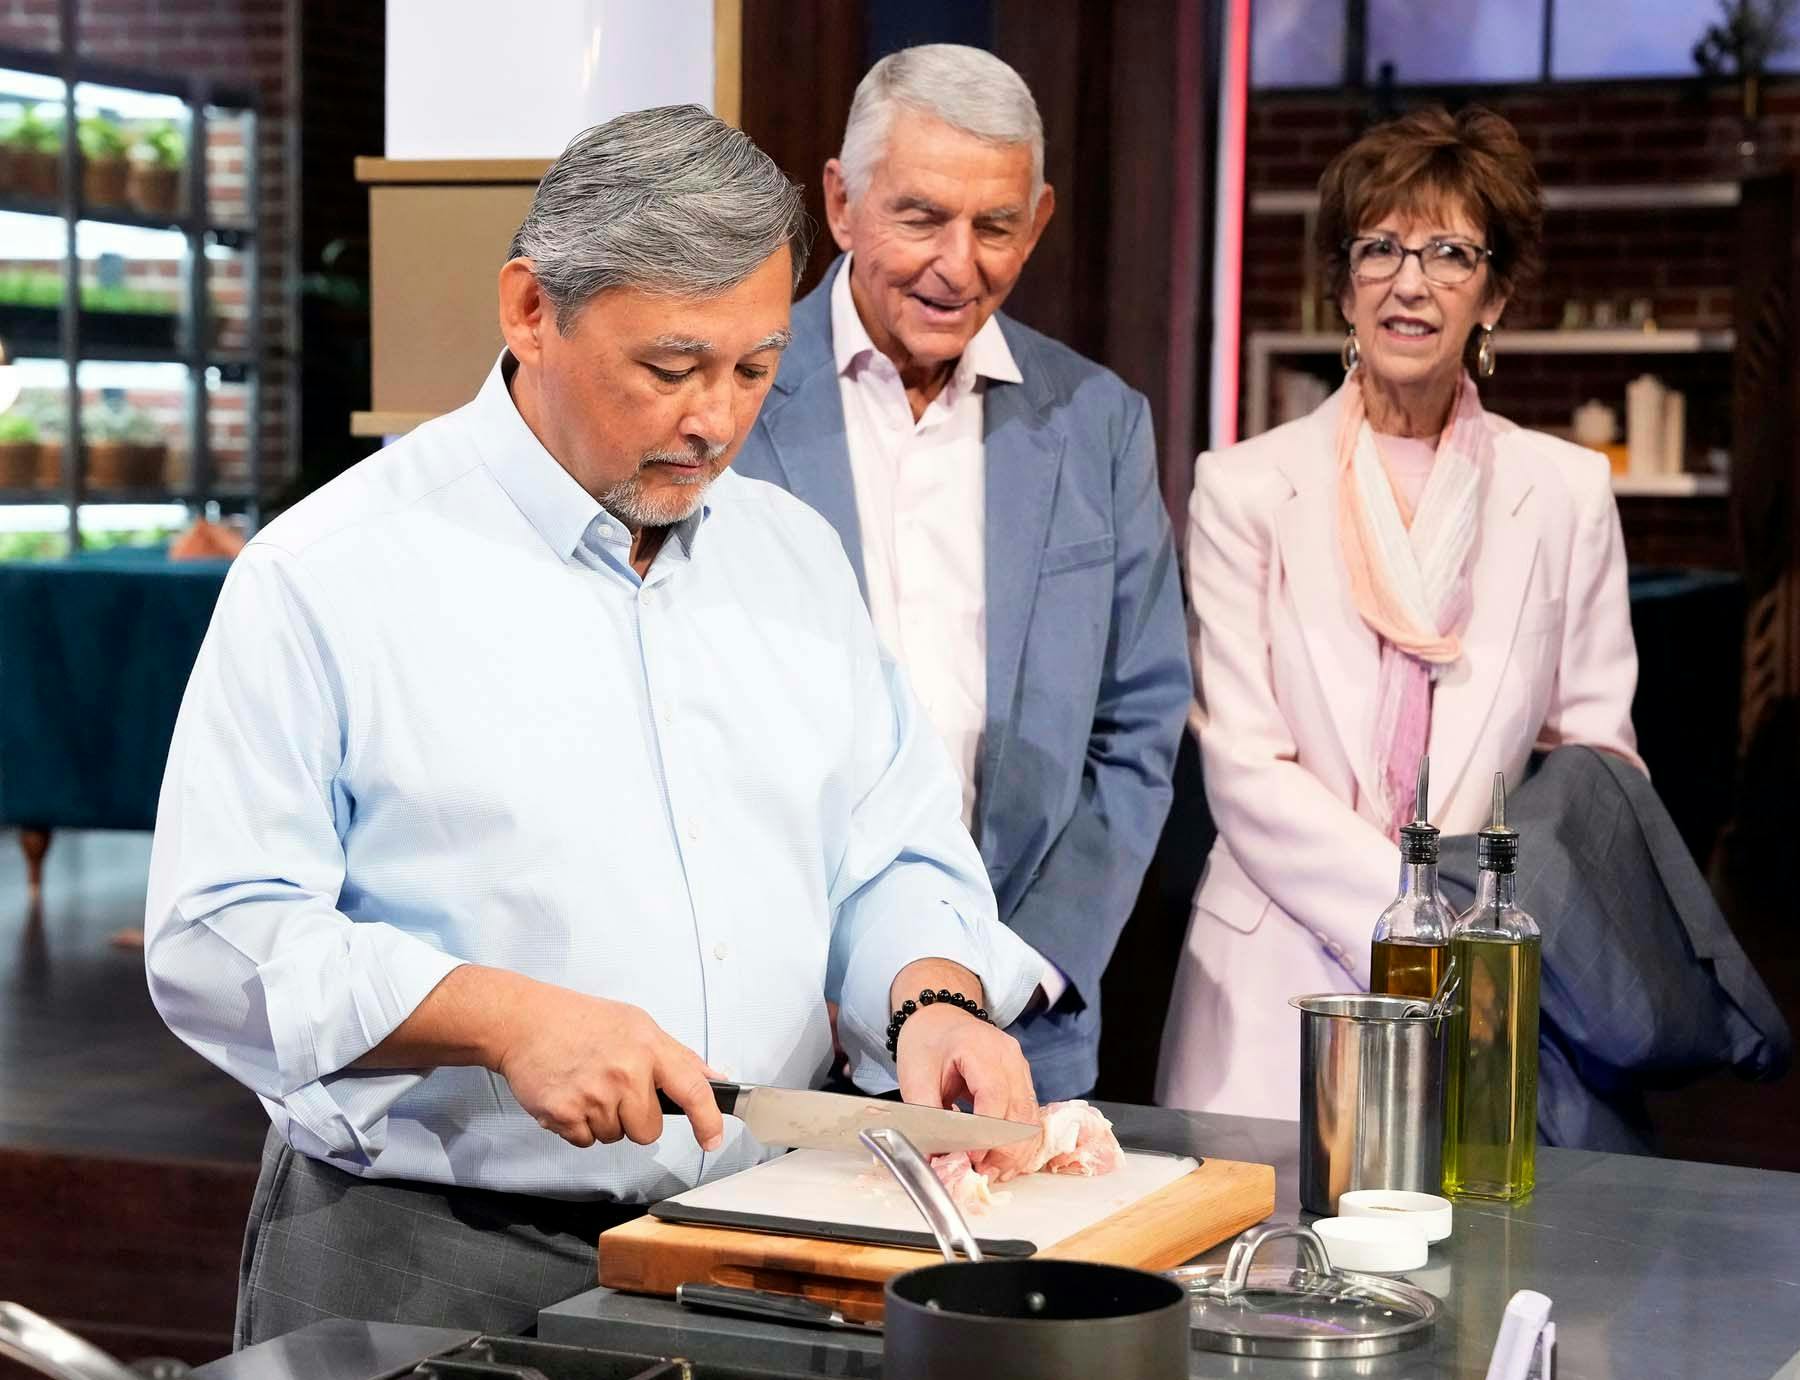 Chris Walinksi, DDS, prepares a dish as his birth father and his wife watch on the set of MasterChef. | © 2024 FOXMEDIA LLC. Cr: FOX.